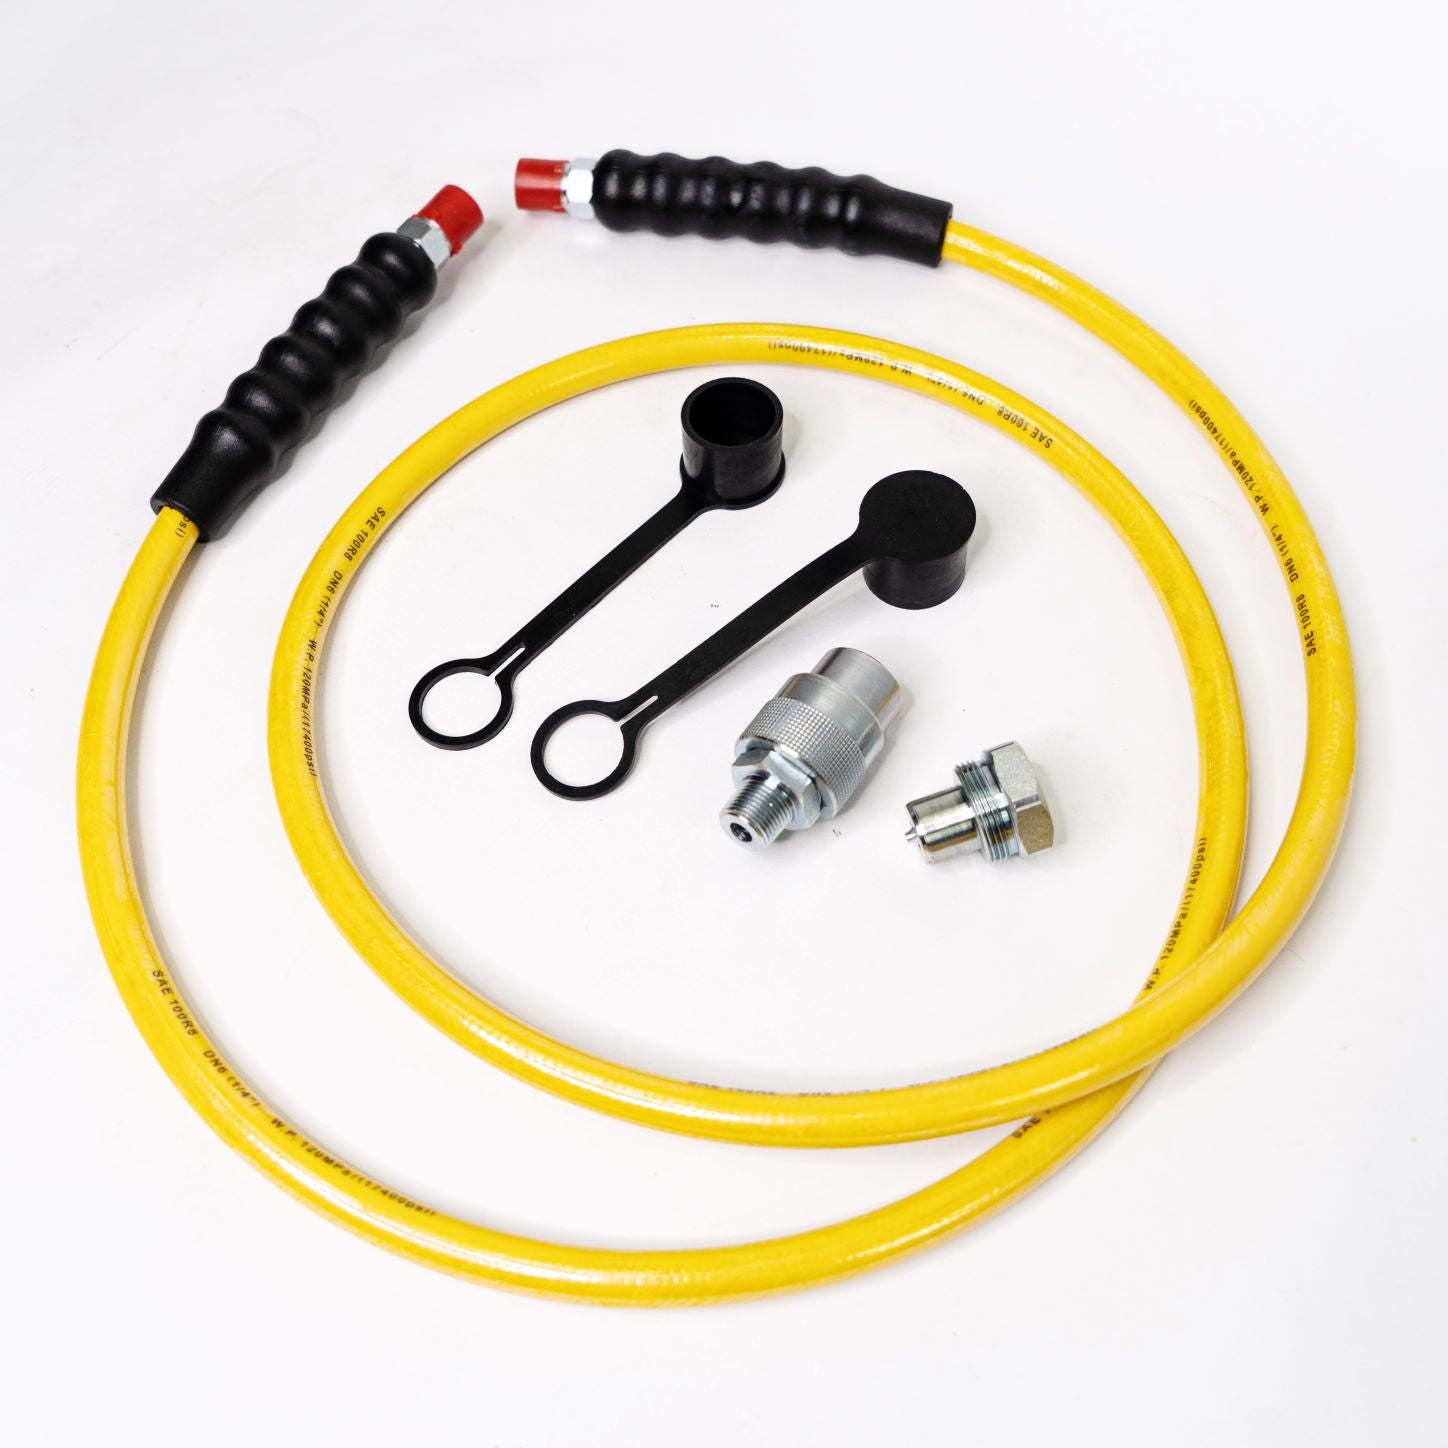 17400 psi ultra high pressure Jacking hose for high pressure hydraulic power units and attachments  complete with bend restrictors and High pressure couplers 